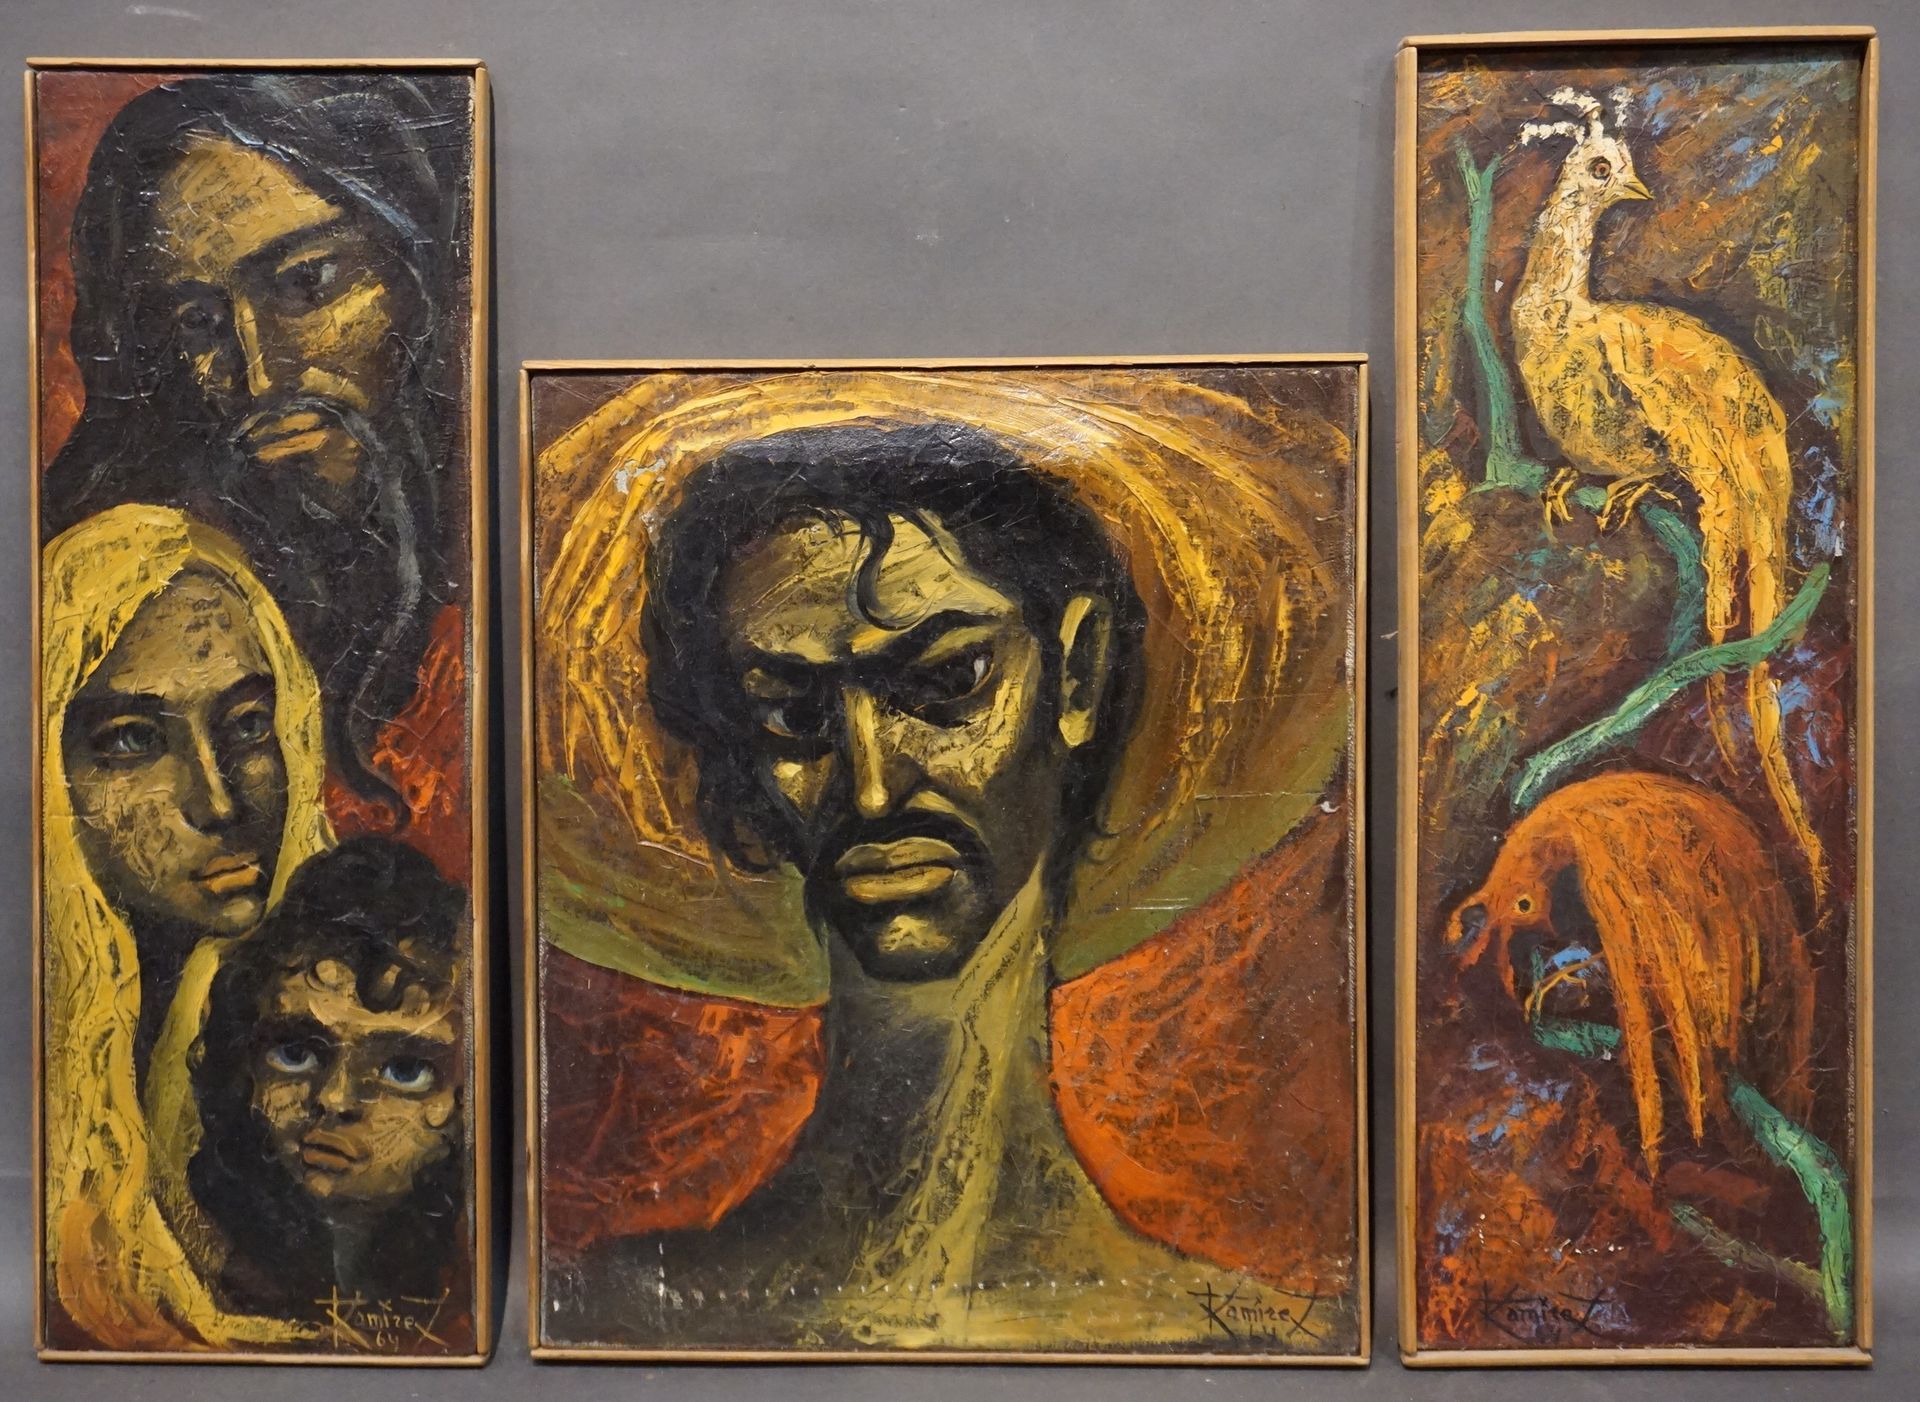 Ramírez Three oils on canvas: "Faces" and "Birds" (60x20 cm), signed, dated 64.